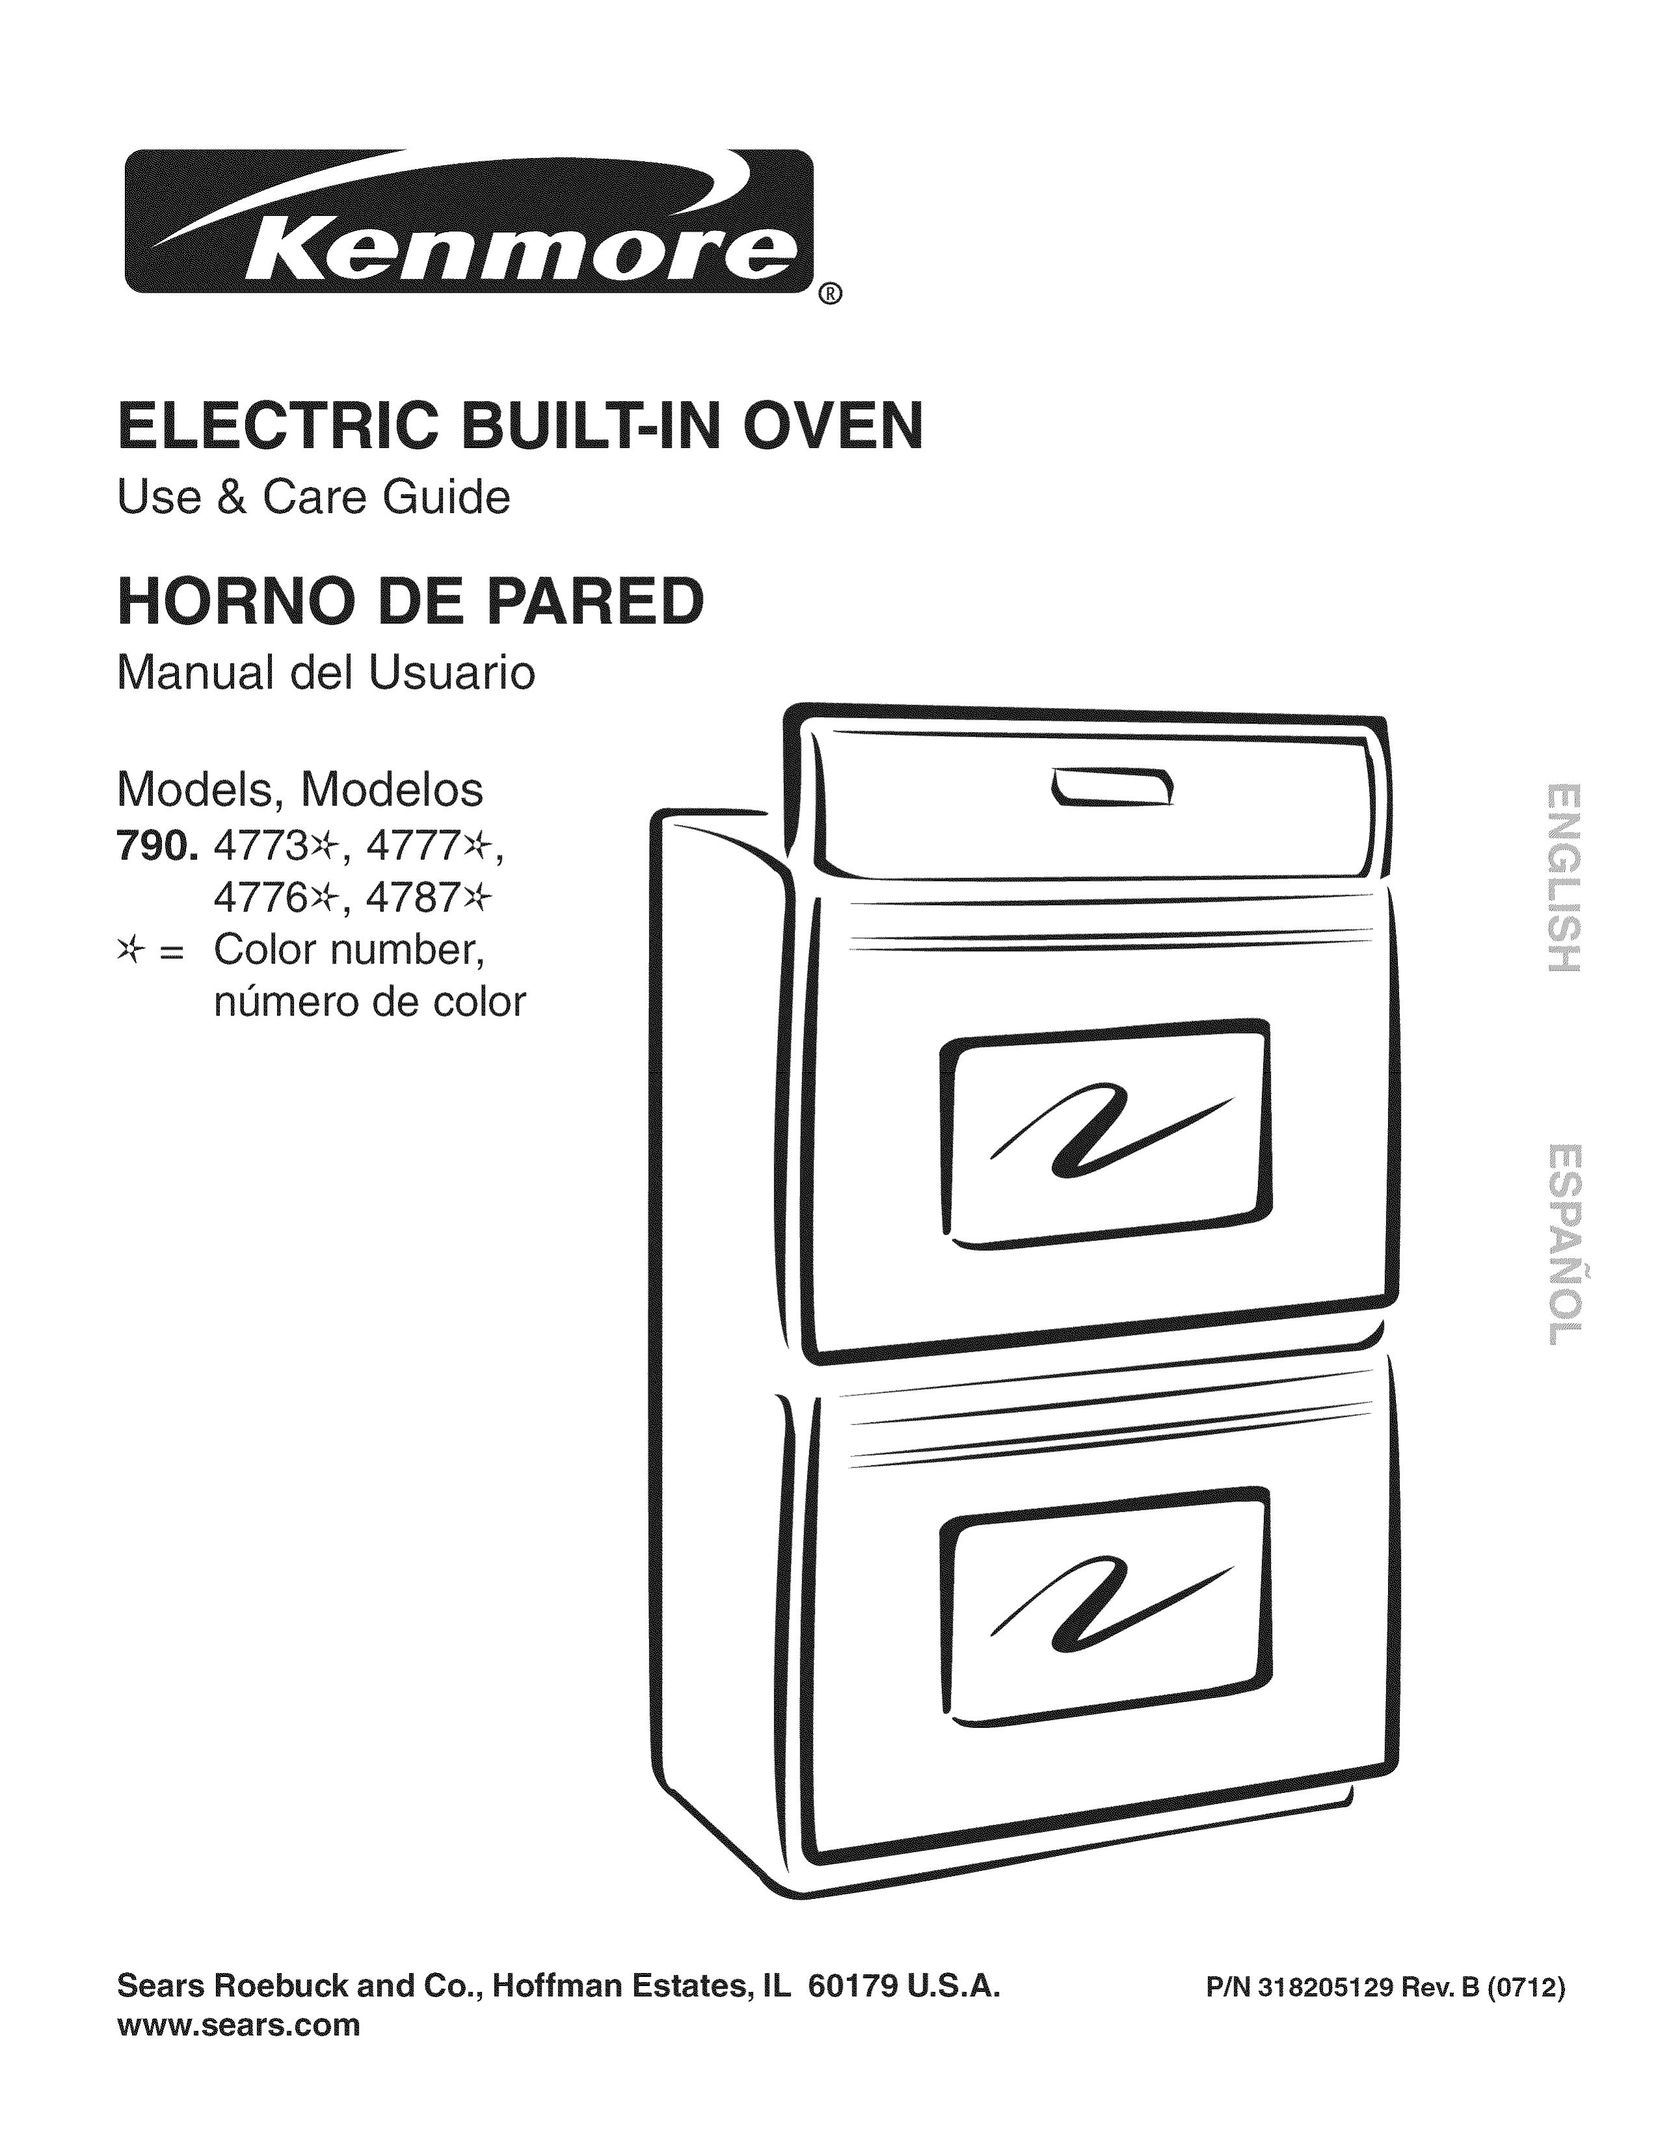 Kenmore 790.4777 Convection Oven User Manual